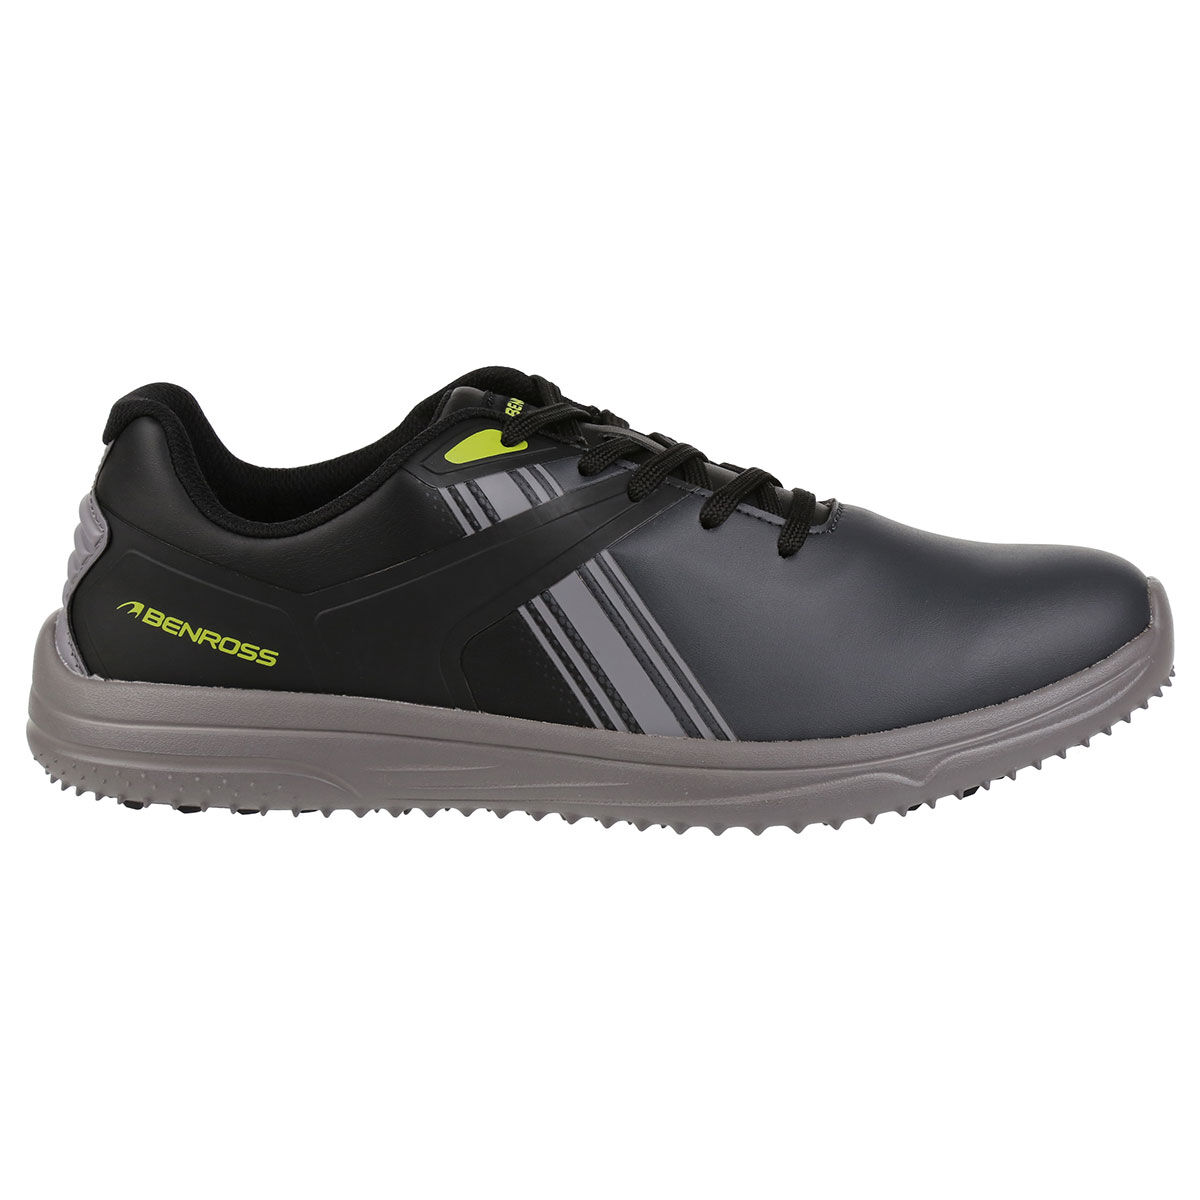 Benross Black, Grey and Yellow Stylish Colour Block Dynamo Waterproof Spikeless Golf Shoes, Size: 7 | American Golf von Benross